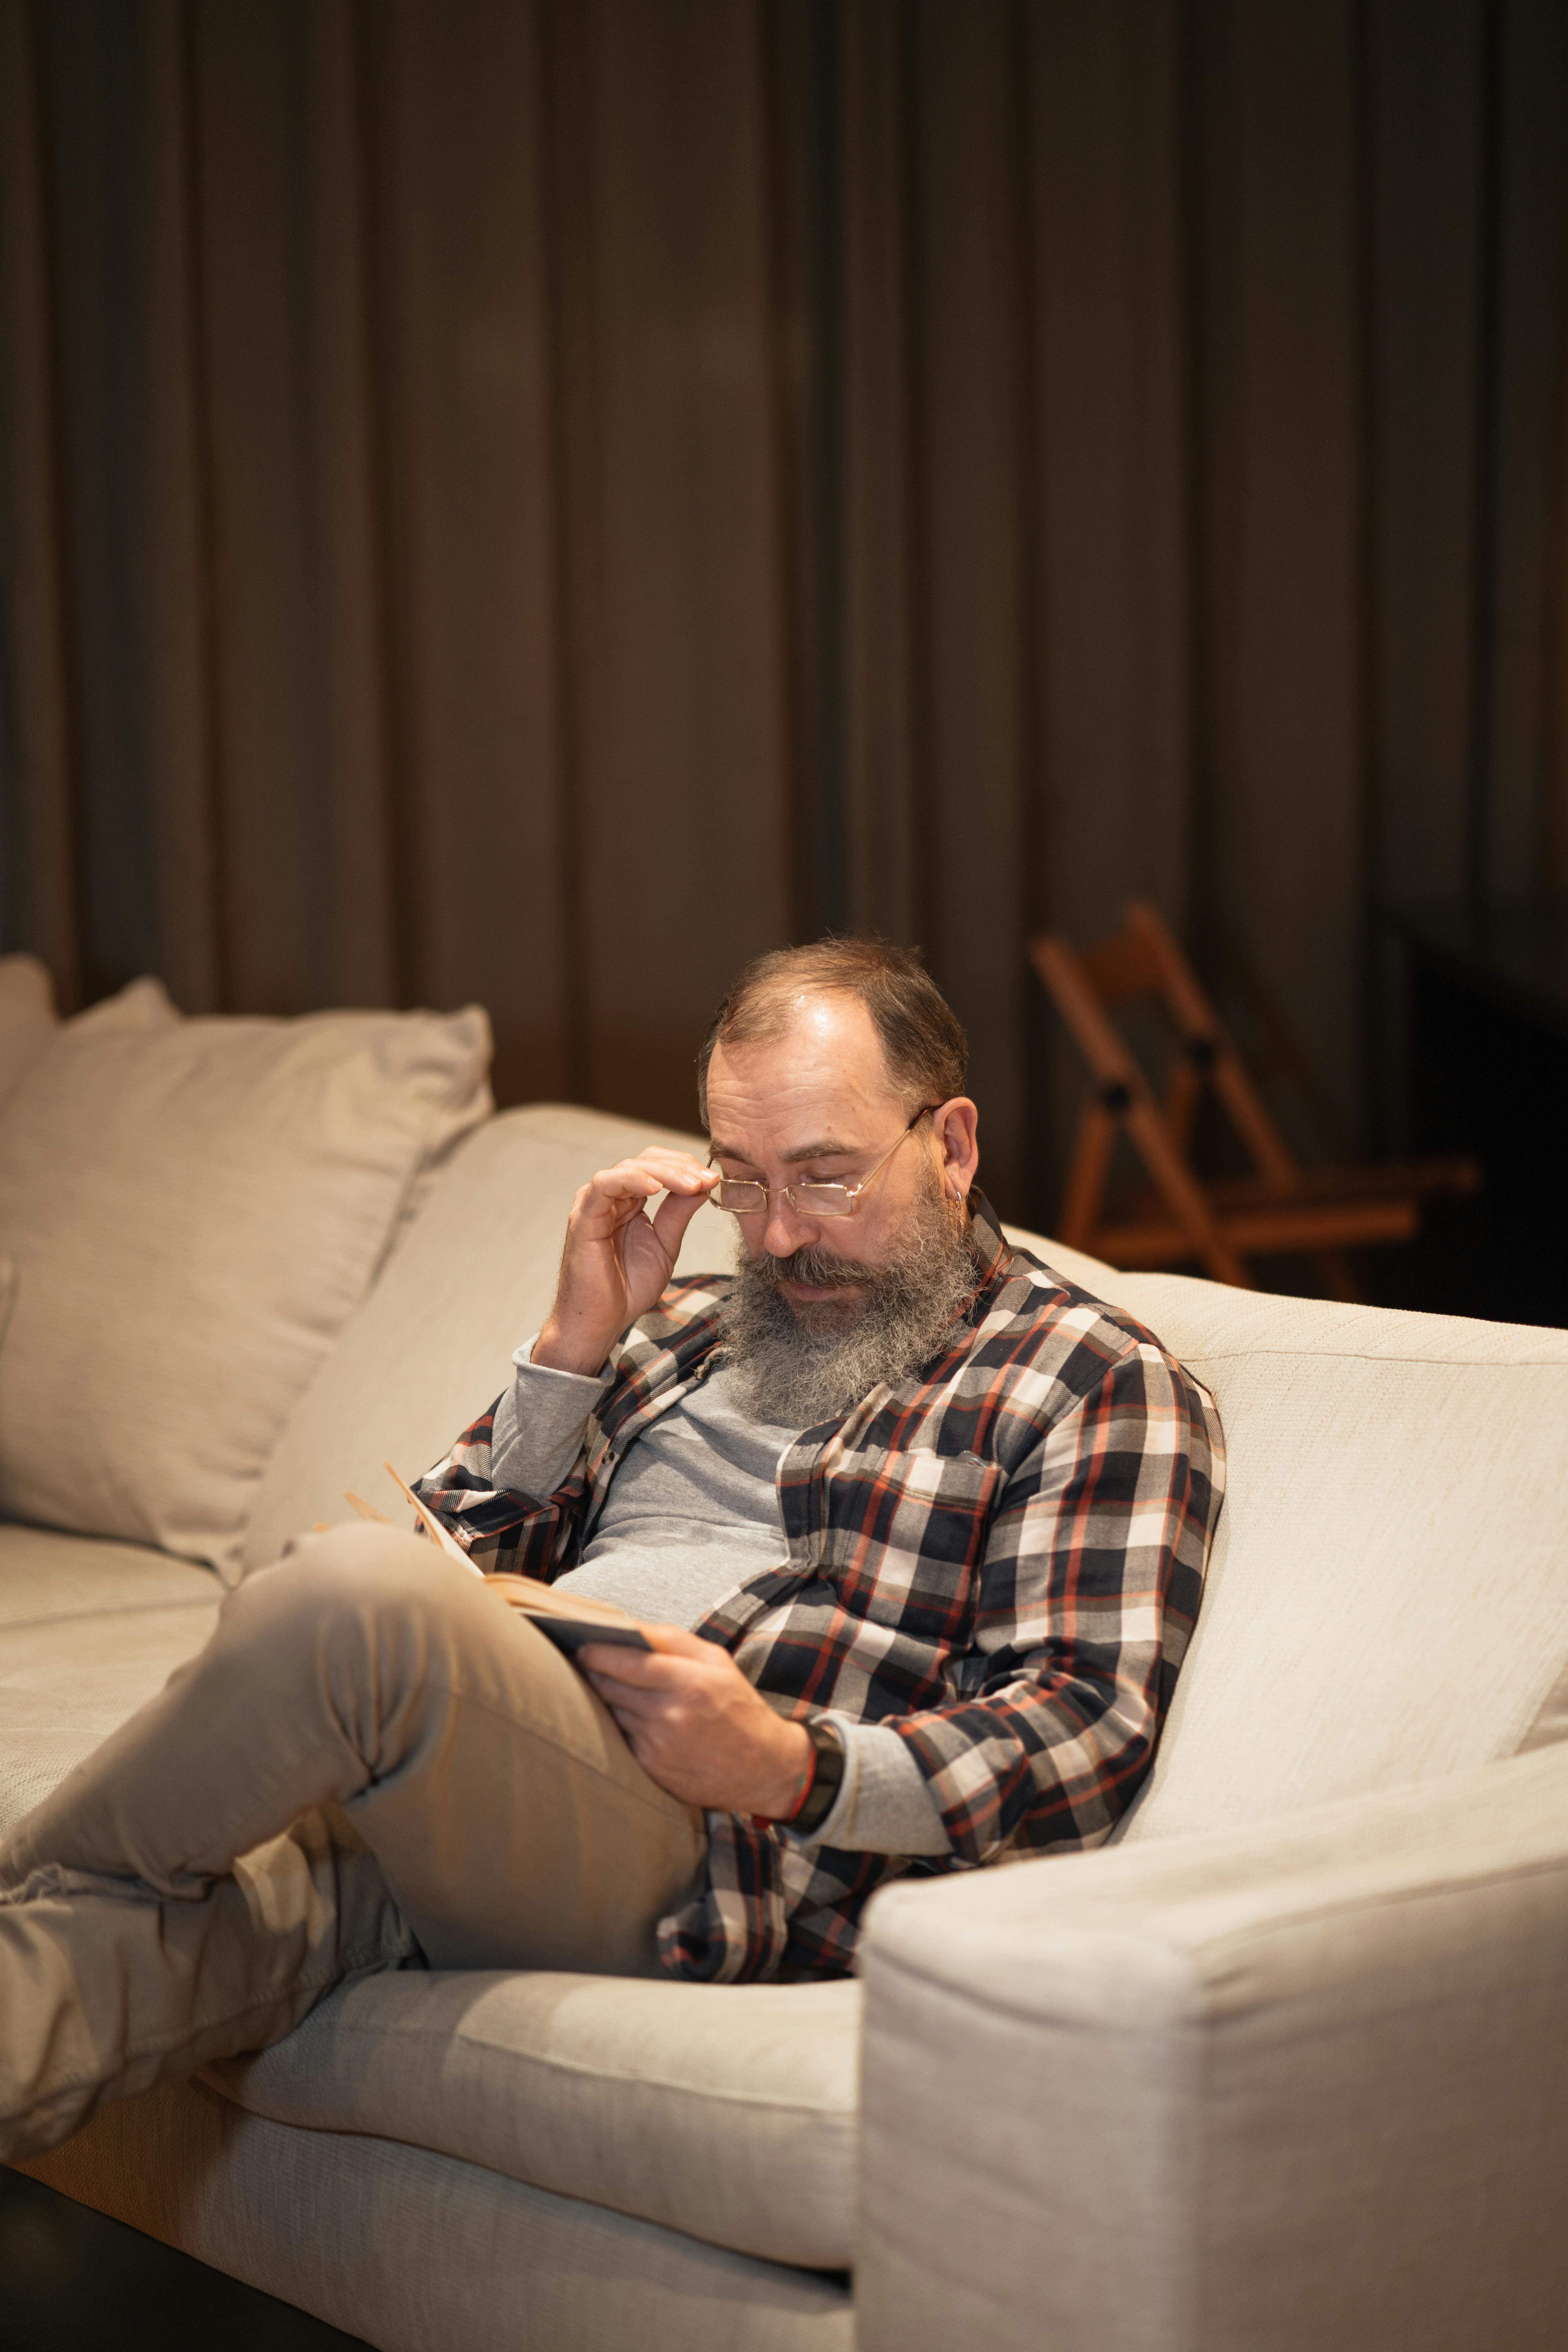 An older man on the sofa | Source: Pexels